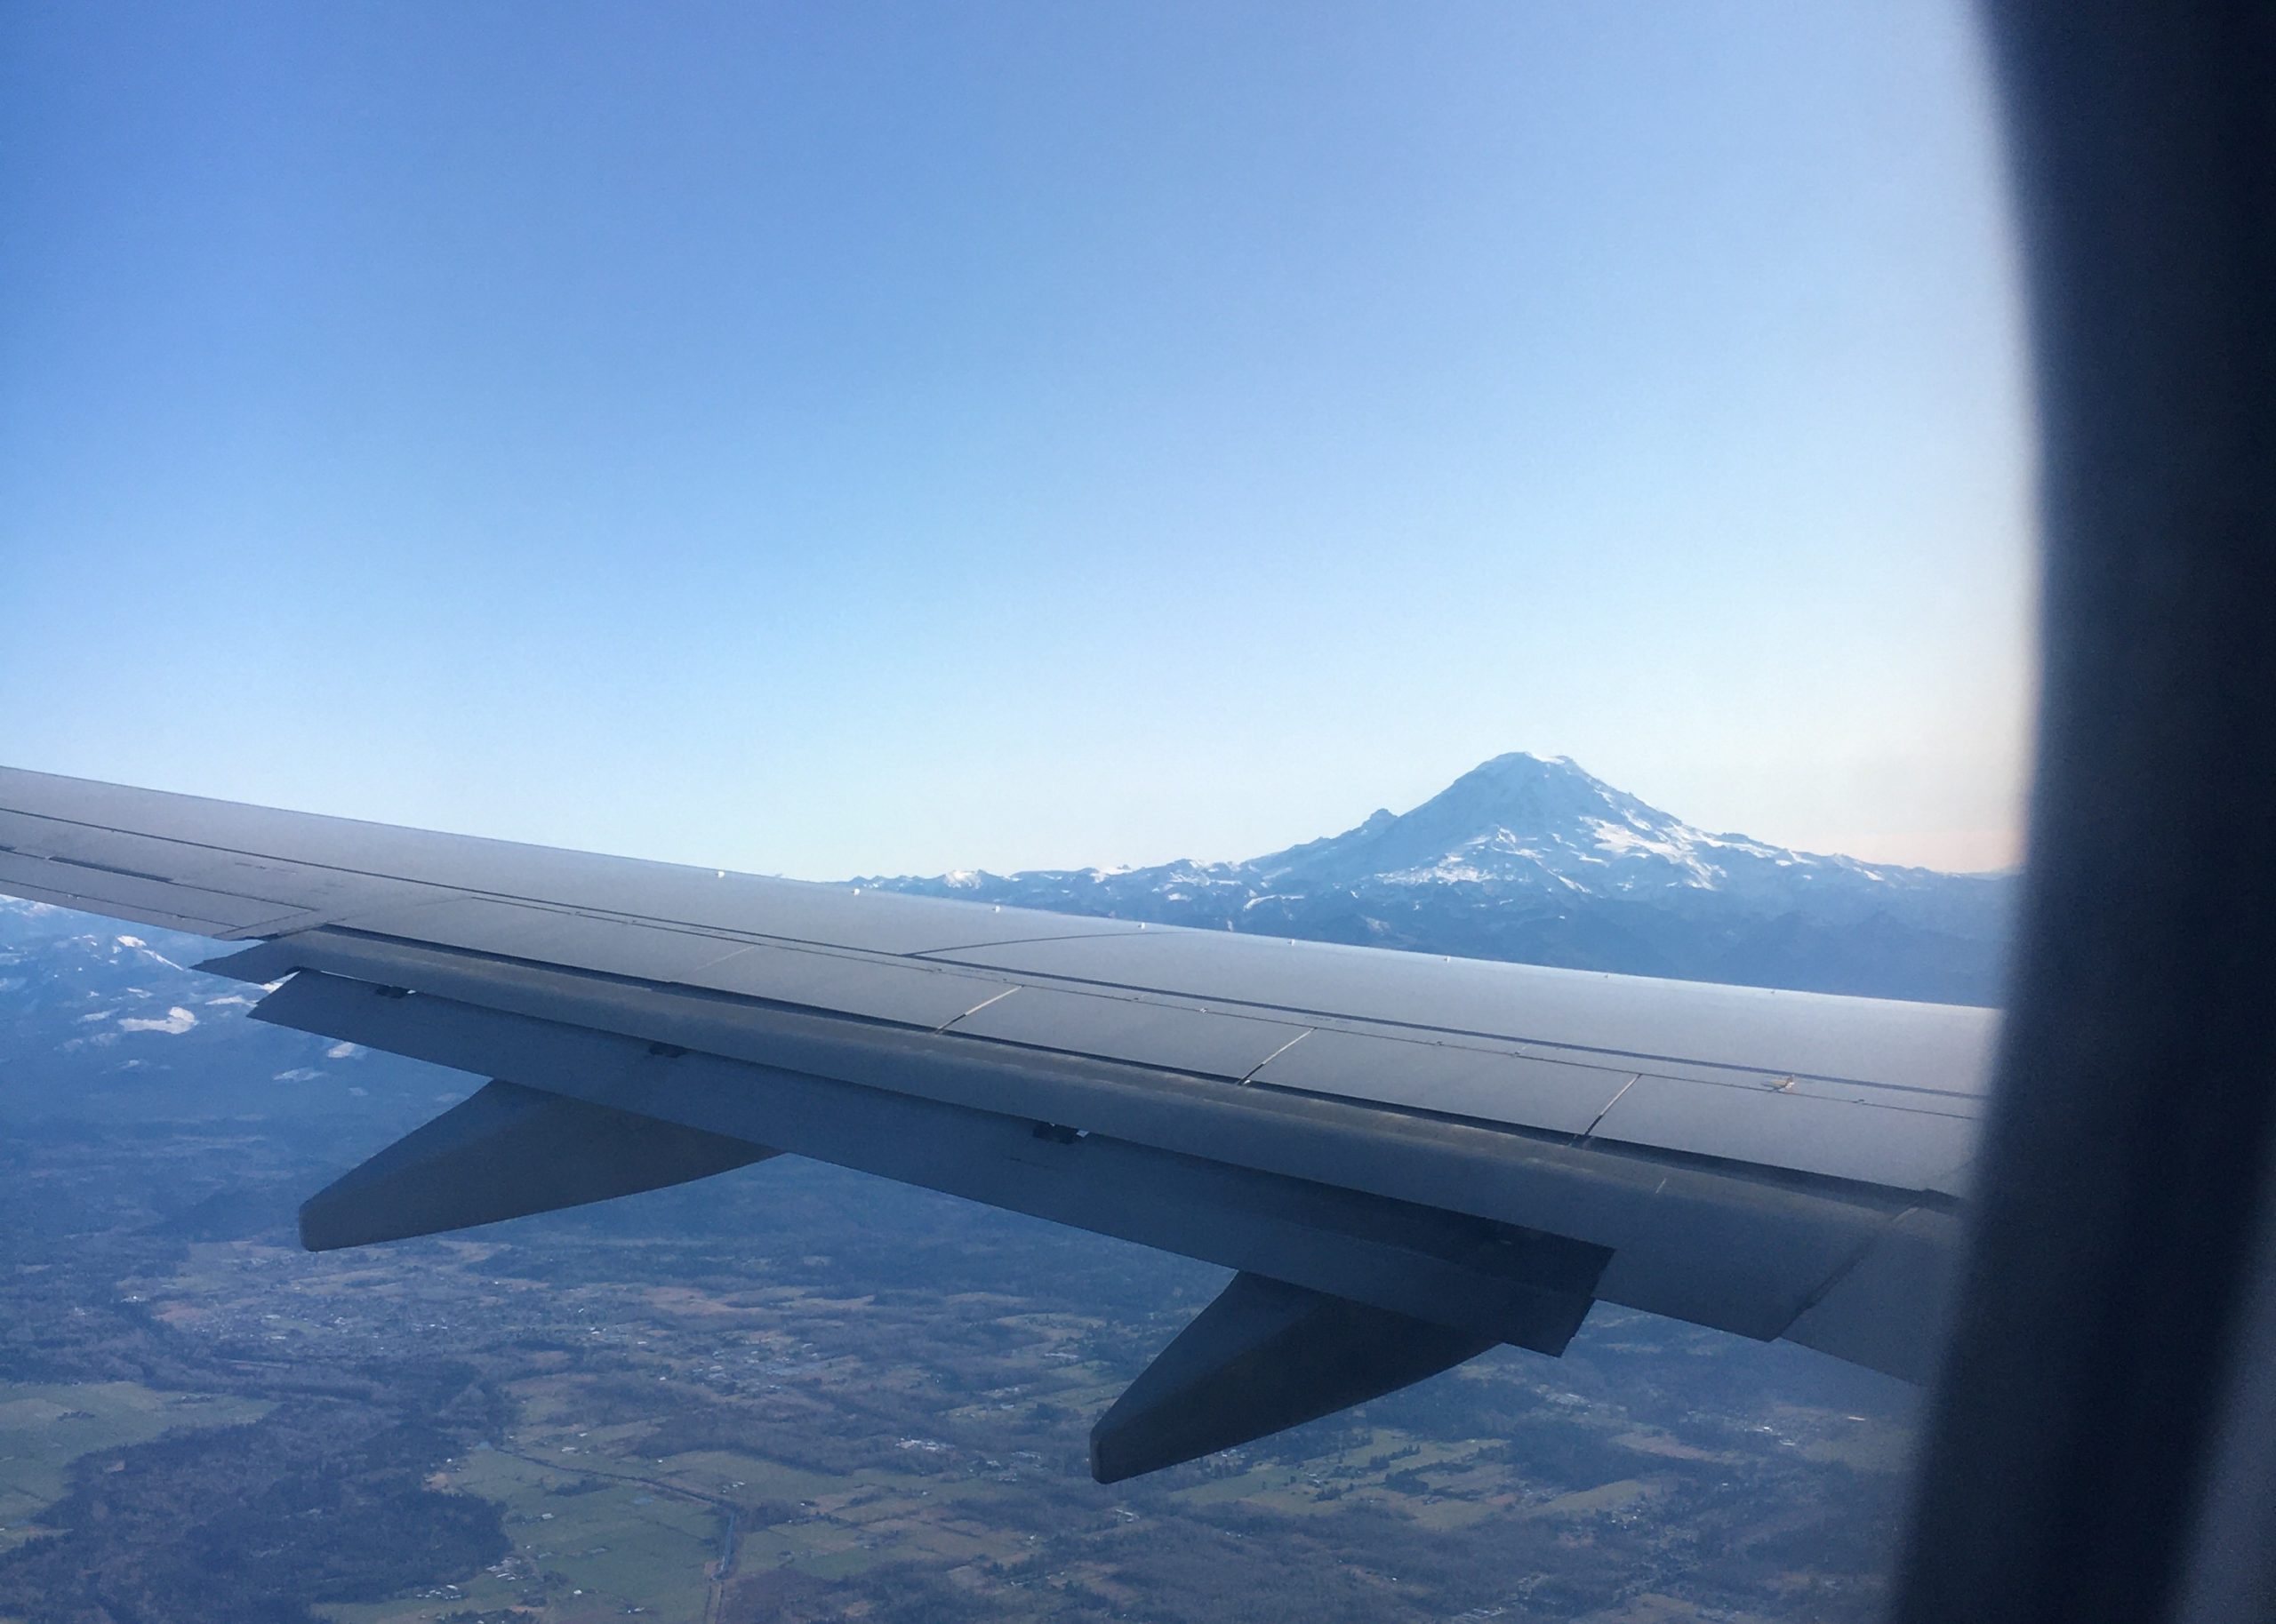 An ariail view of an airplane wing over the Pacific Northwest in an unseasonably dry November. Tahoma (Mt. Rainier) can be seen clearly in the distance.